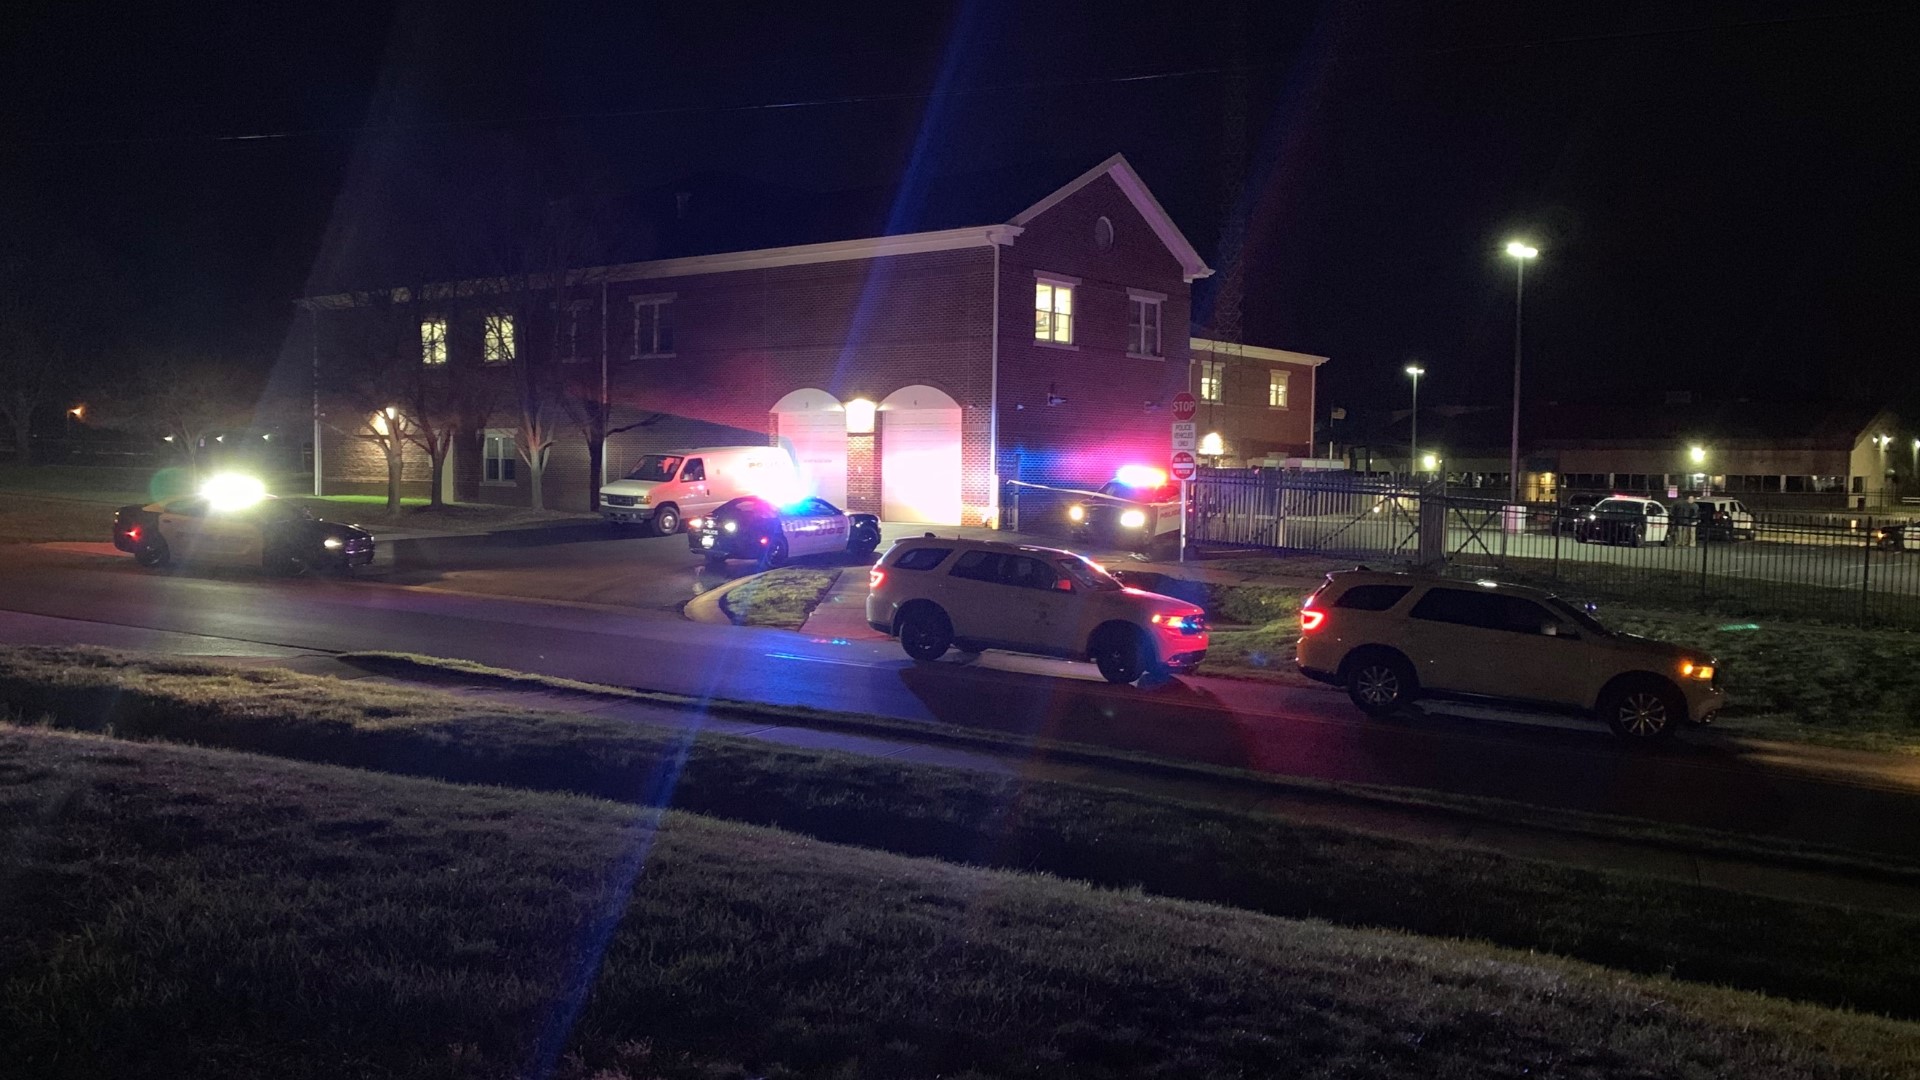 The shooting occurred outside the Greenwood Police Department.